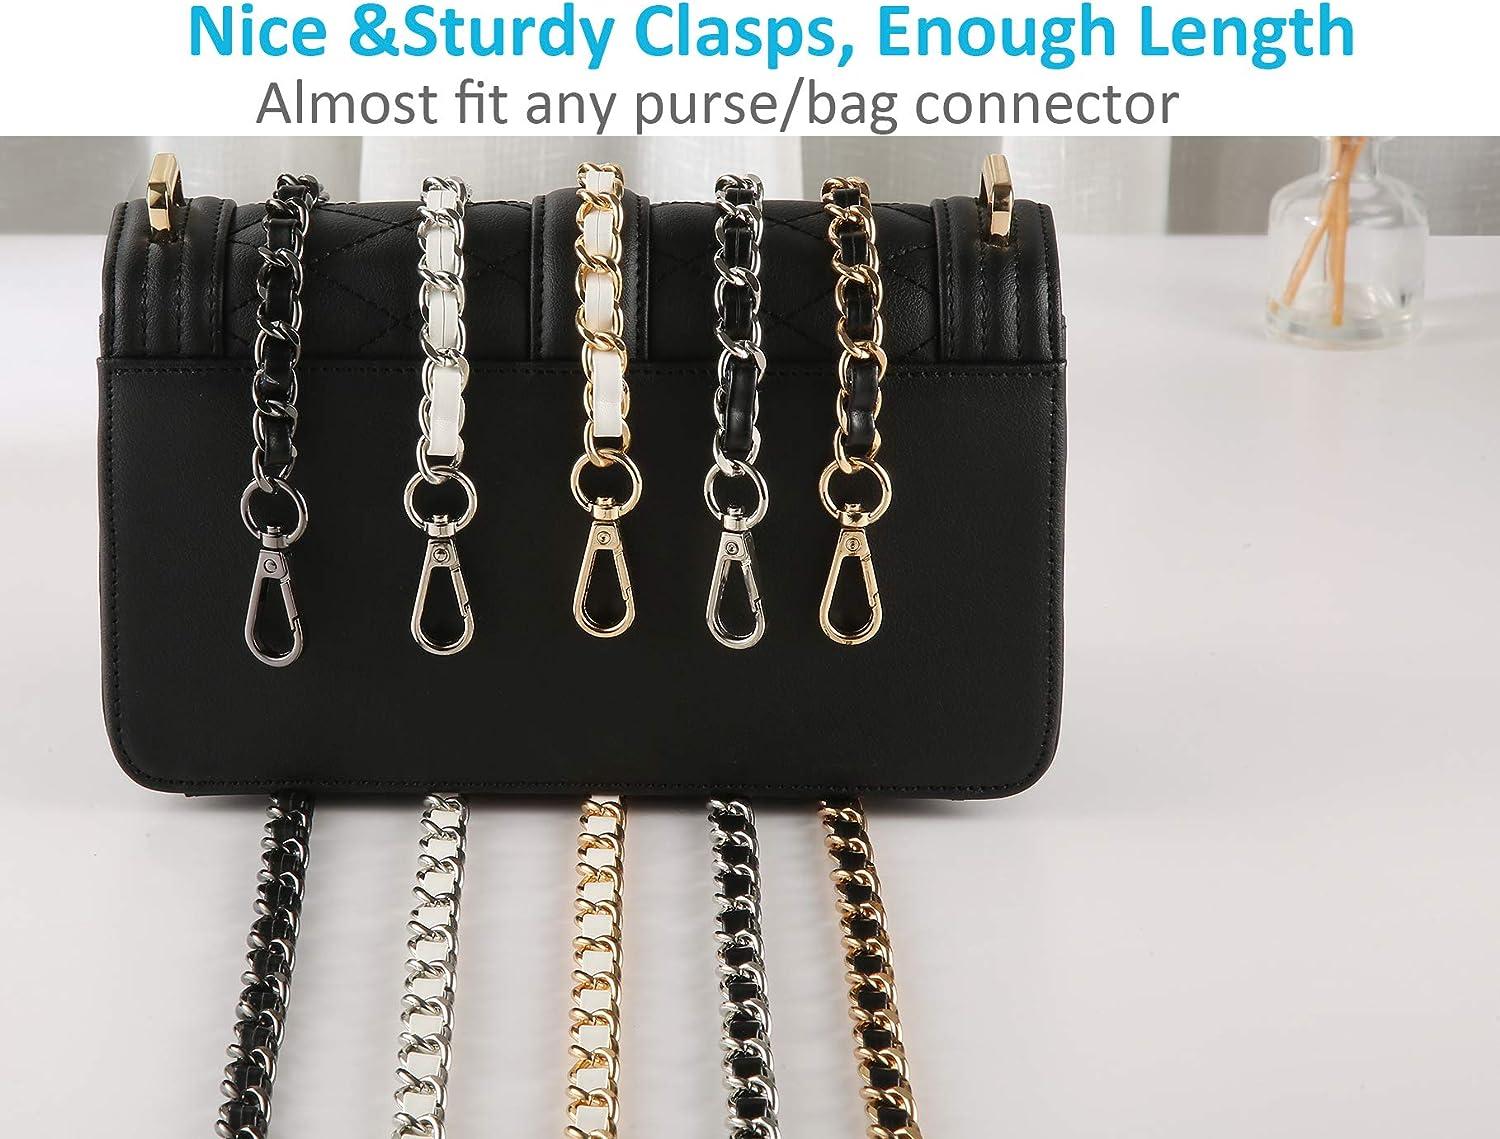 YFMHA Purse Chain Strap for Shoulder Bag 47 inch 2pcs (Gold Chain+Black  Leather) 